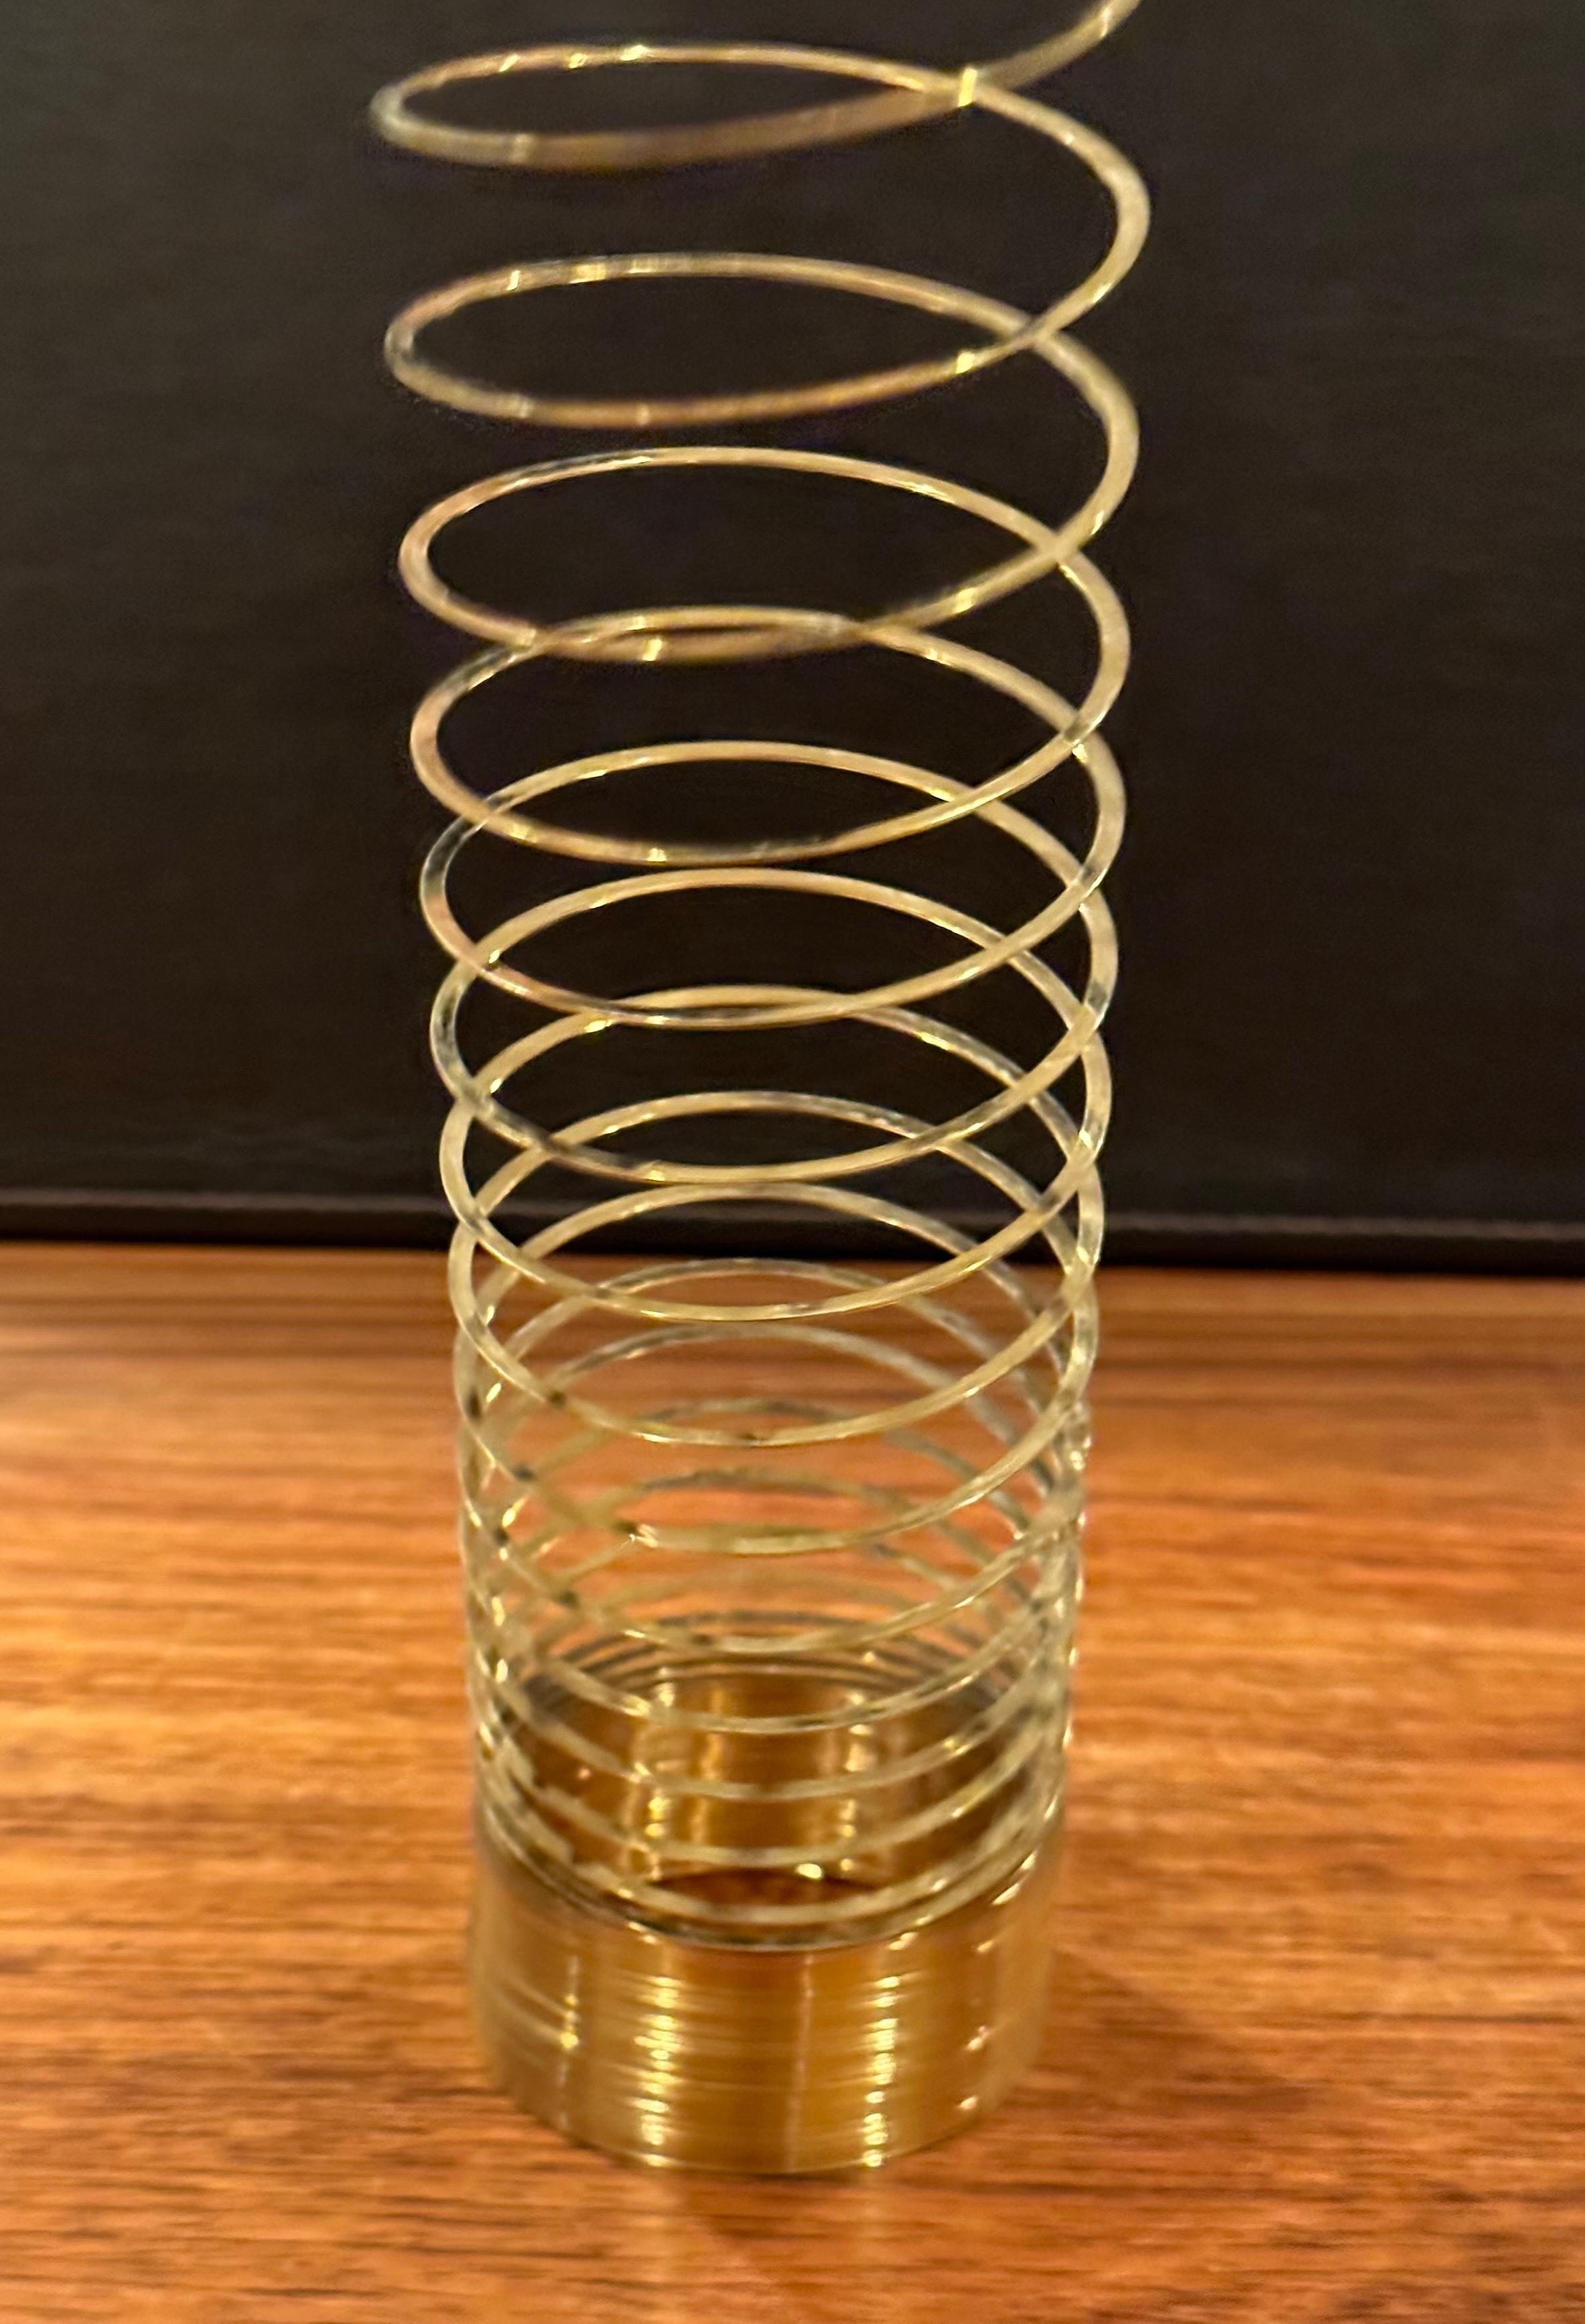 50th Anniversary Gold-Plated Slinky Toy in Wood Box For Sale 1